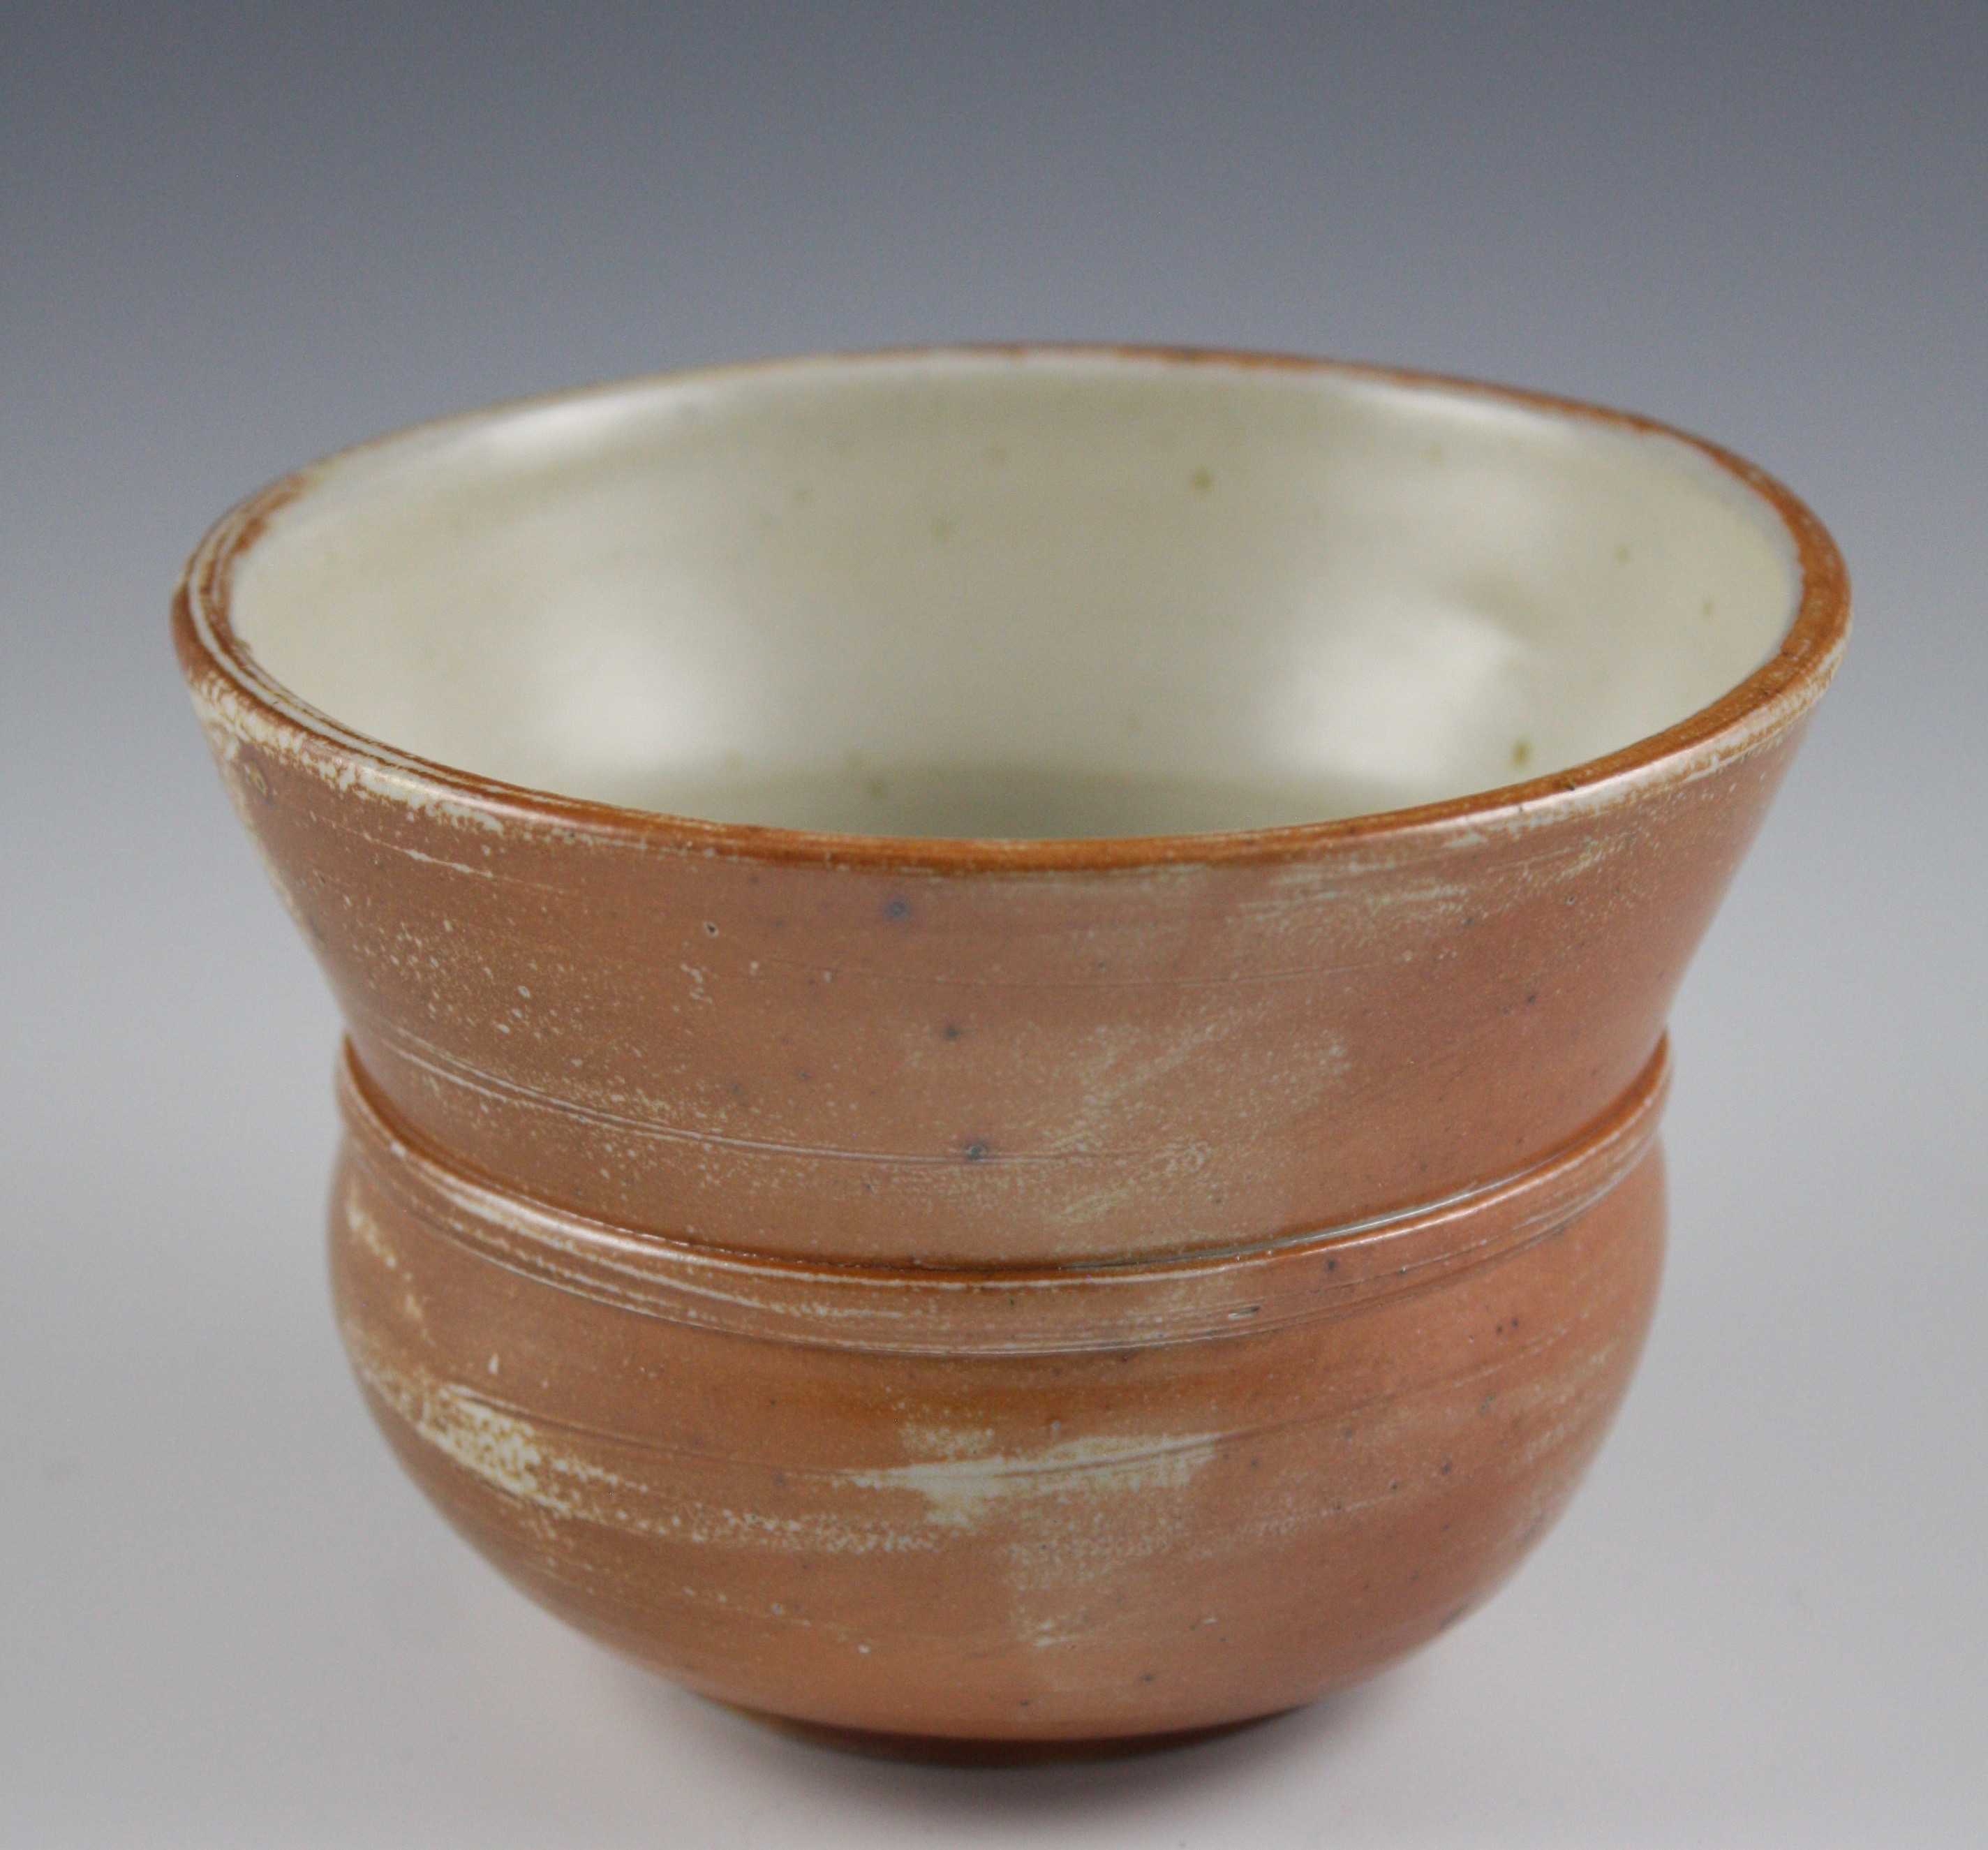 Small Spittoon-Shaped Bowl #31